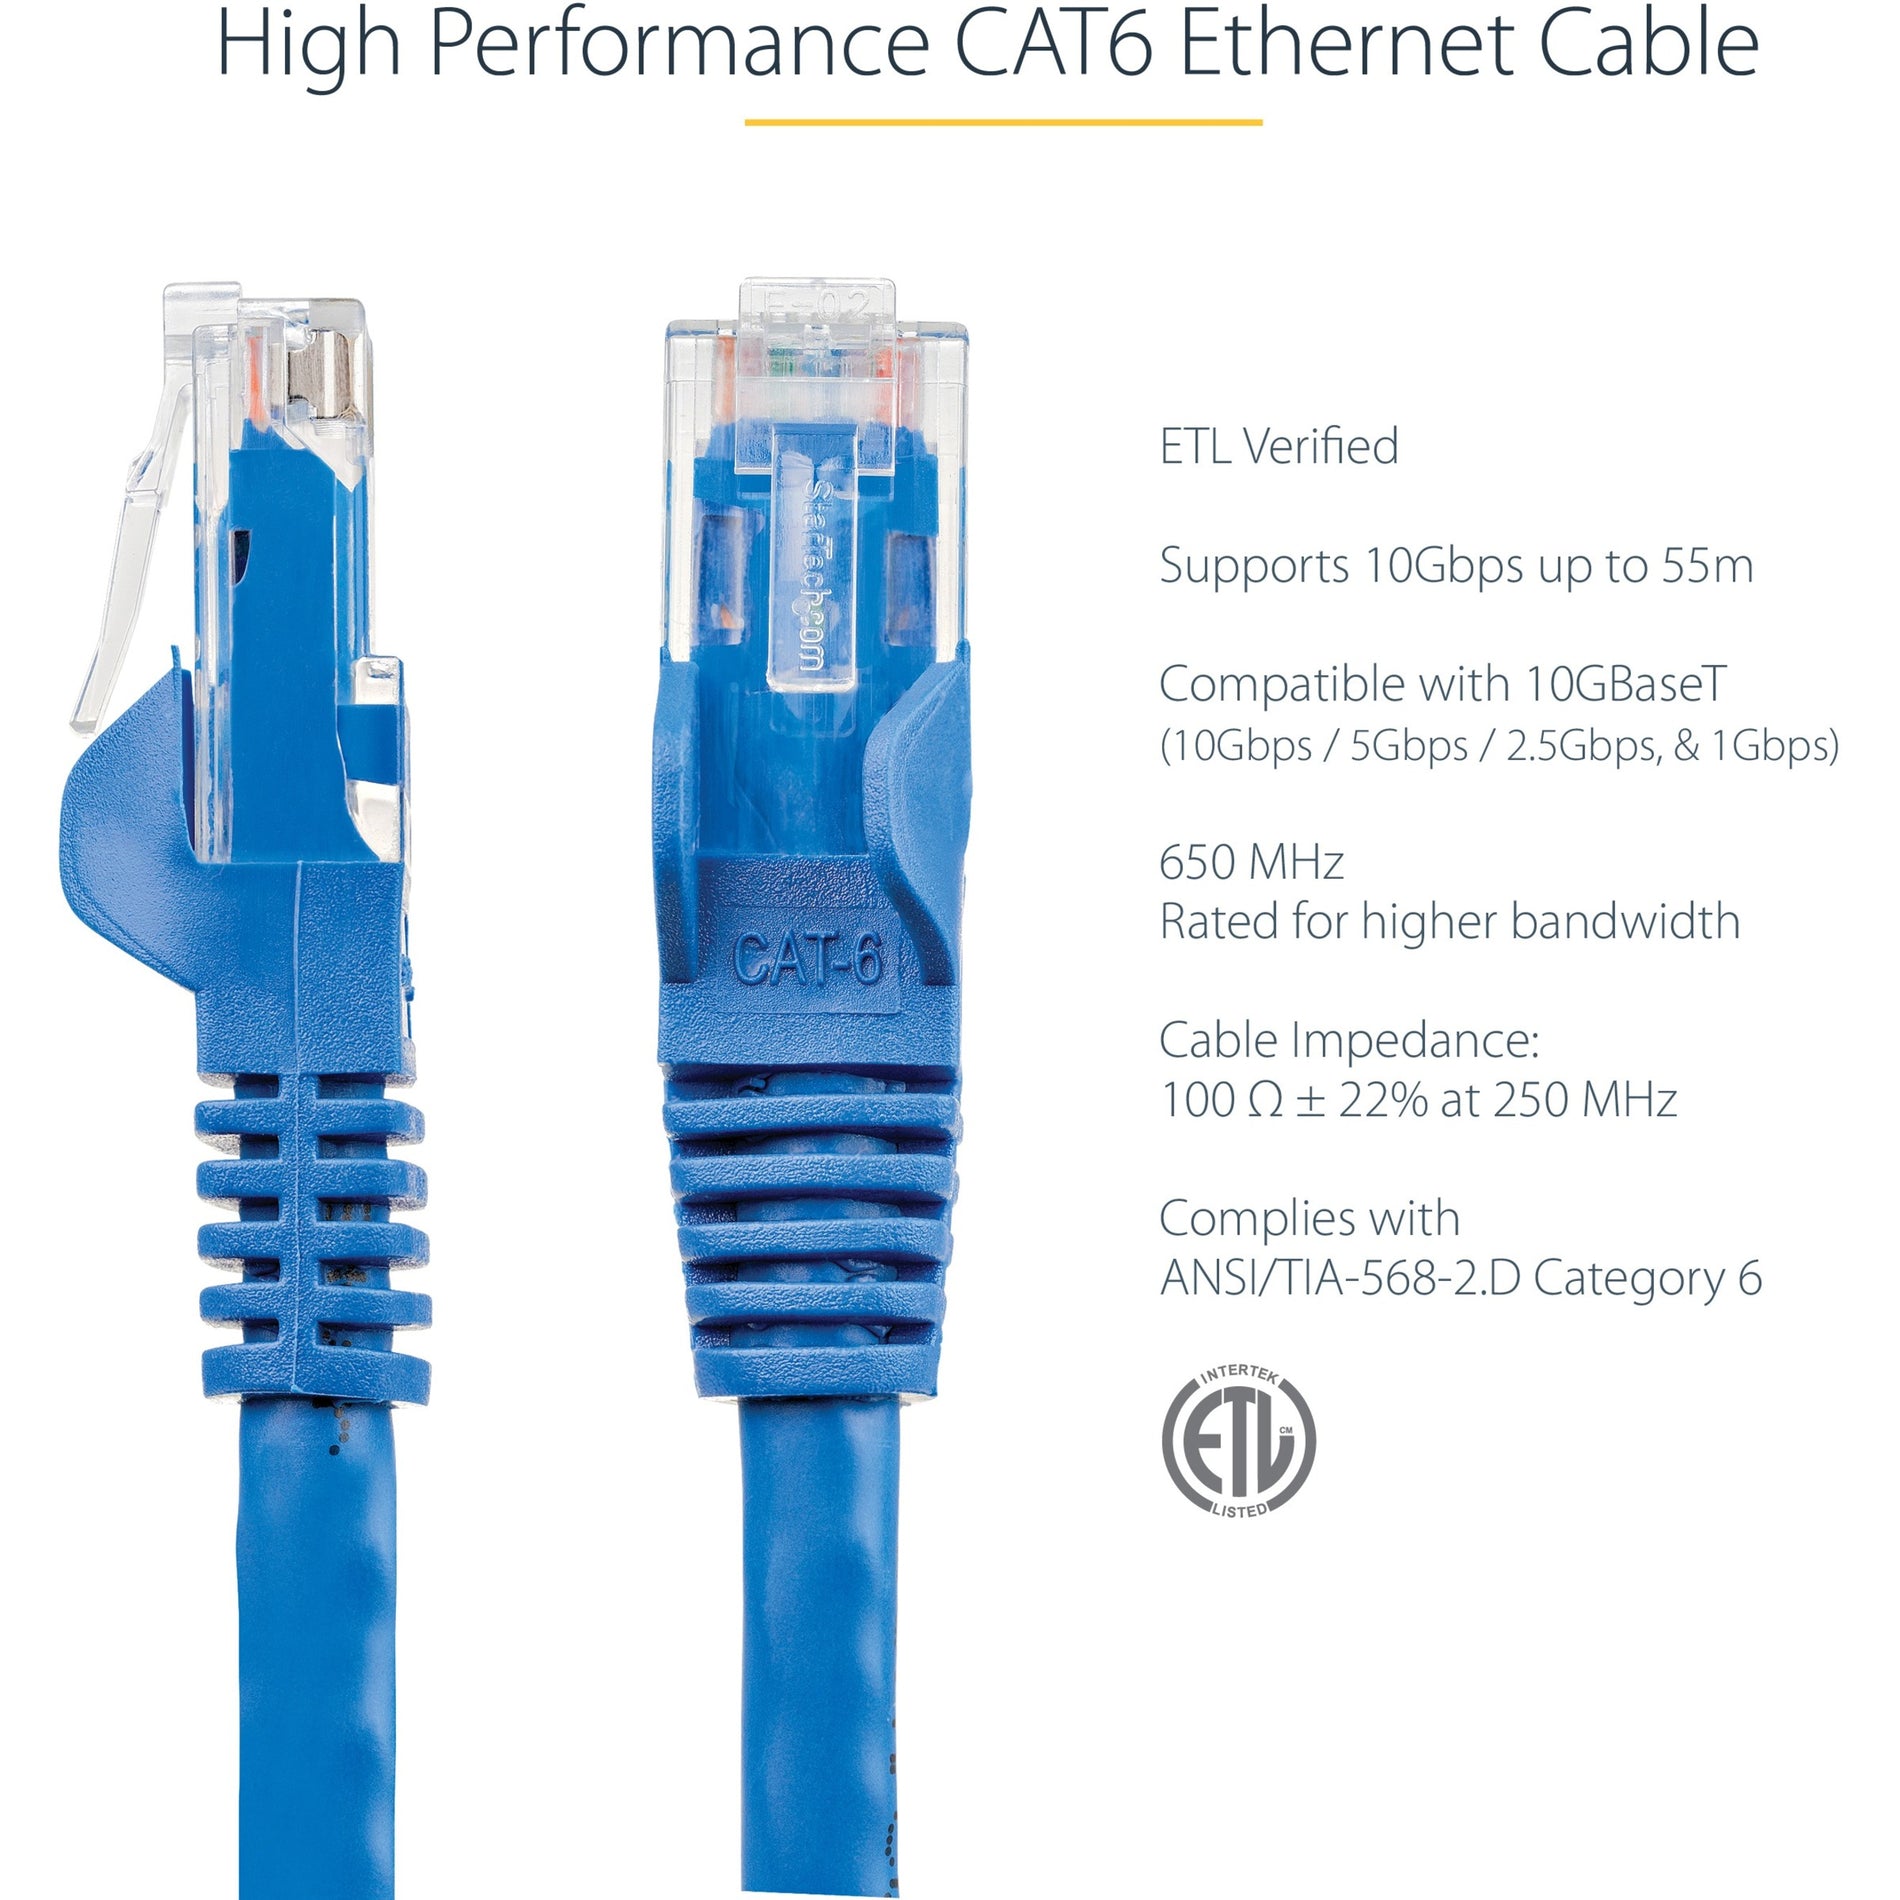 StarTech.com N6PATCH20BL Cat. 6 Network Cable, 20 ft, PoE, Stranded, Molded, Snagless, Gold Plated Connectors, Blue